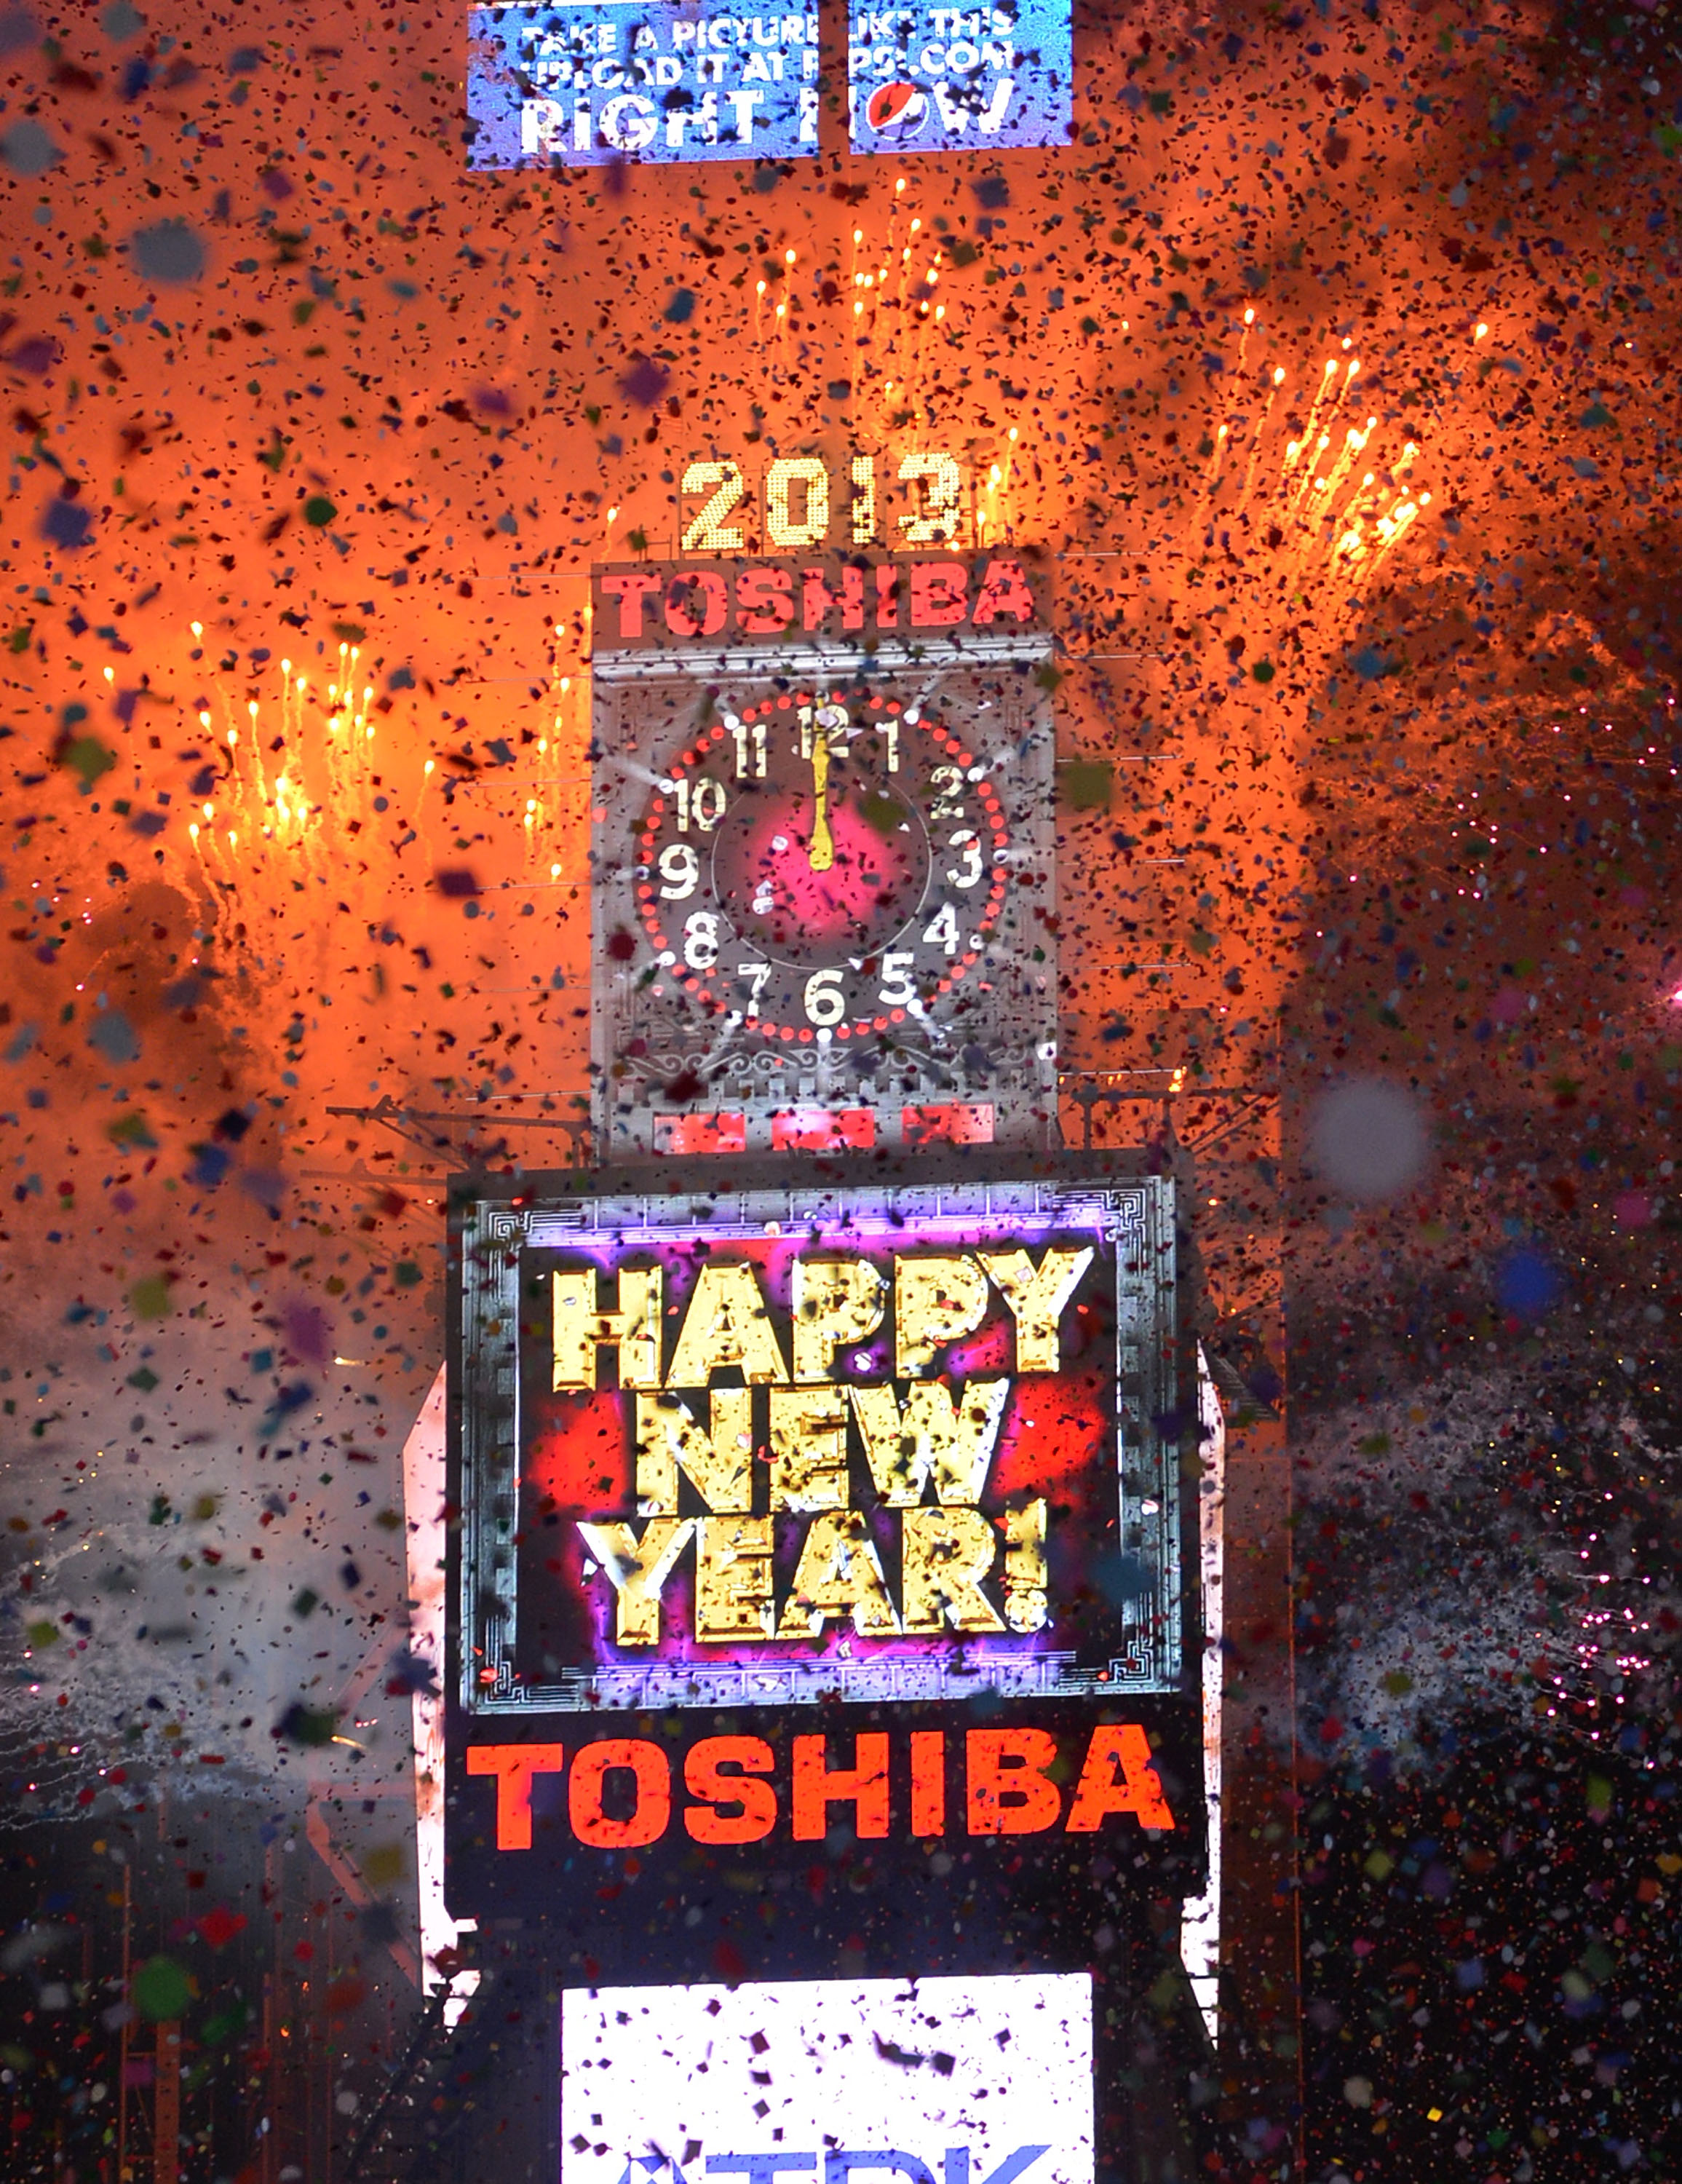 A view of atmosphere during New Year's Eve 2013 In Times Square at Times Square on December 31, 2012 in New York City. (Mike Coppola—Getty Images)